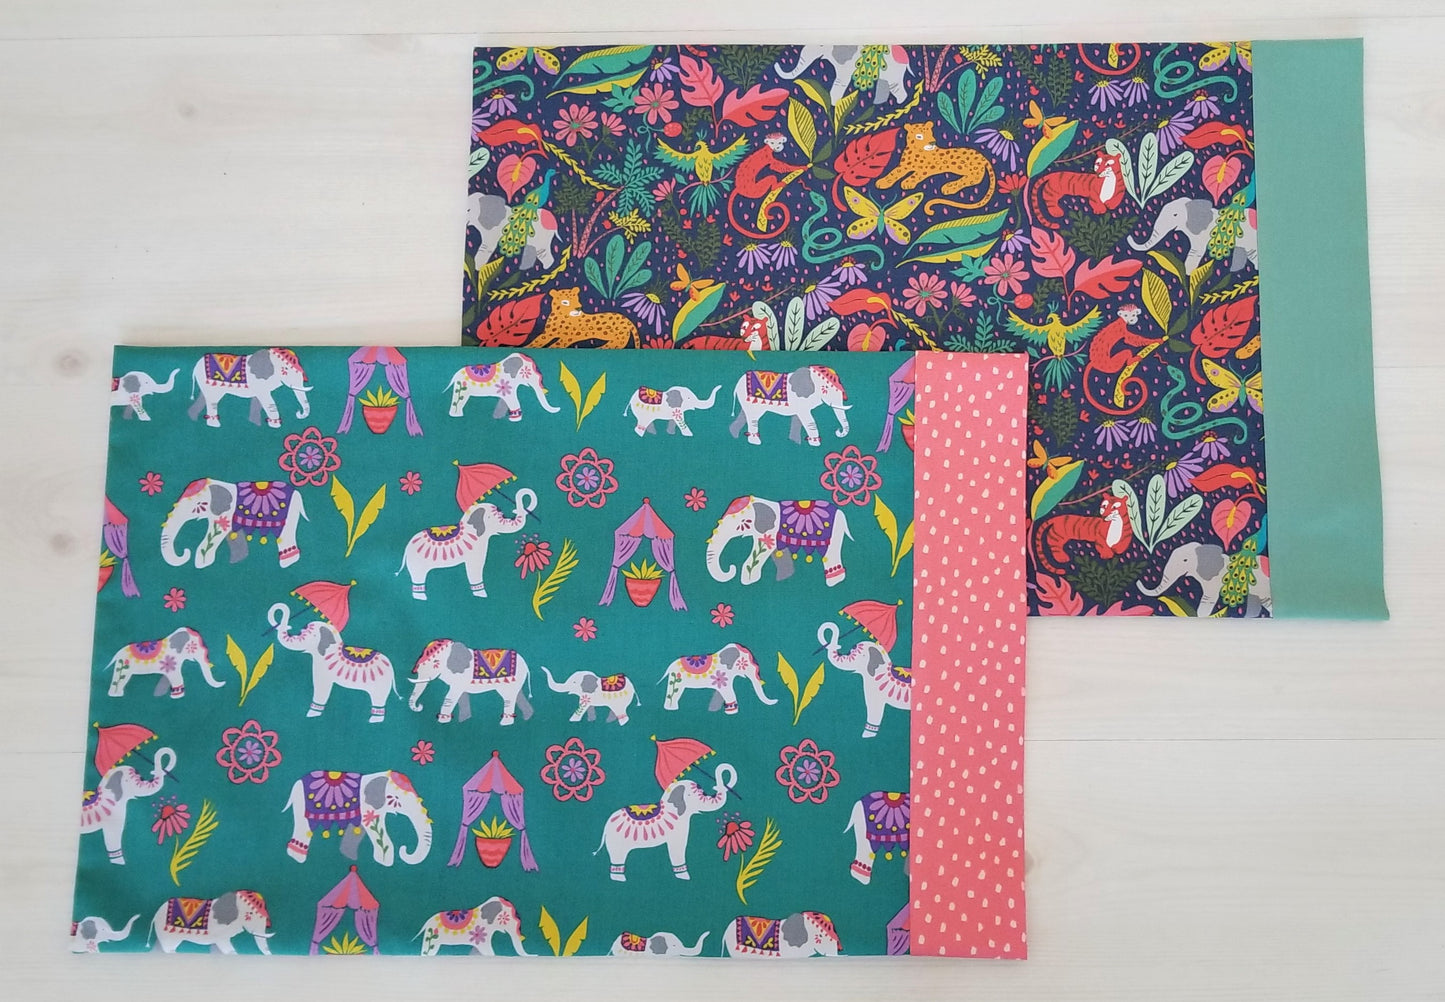 Organic Toddler And Travel Pillowcase with Elephants and Other Prints